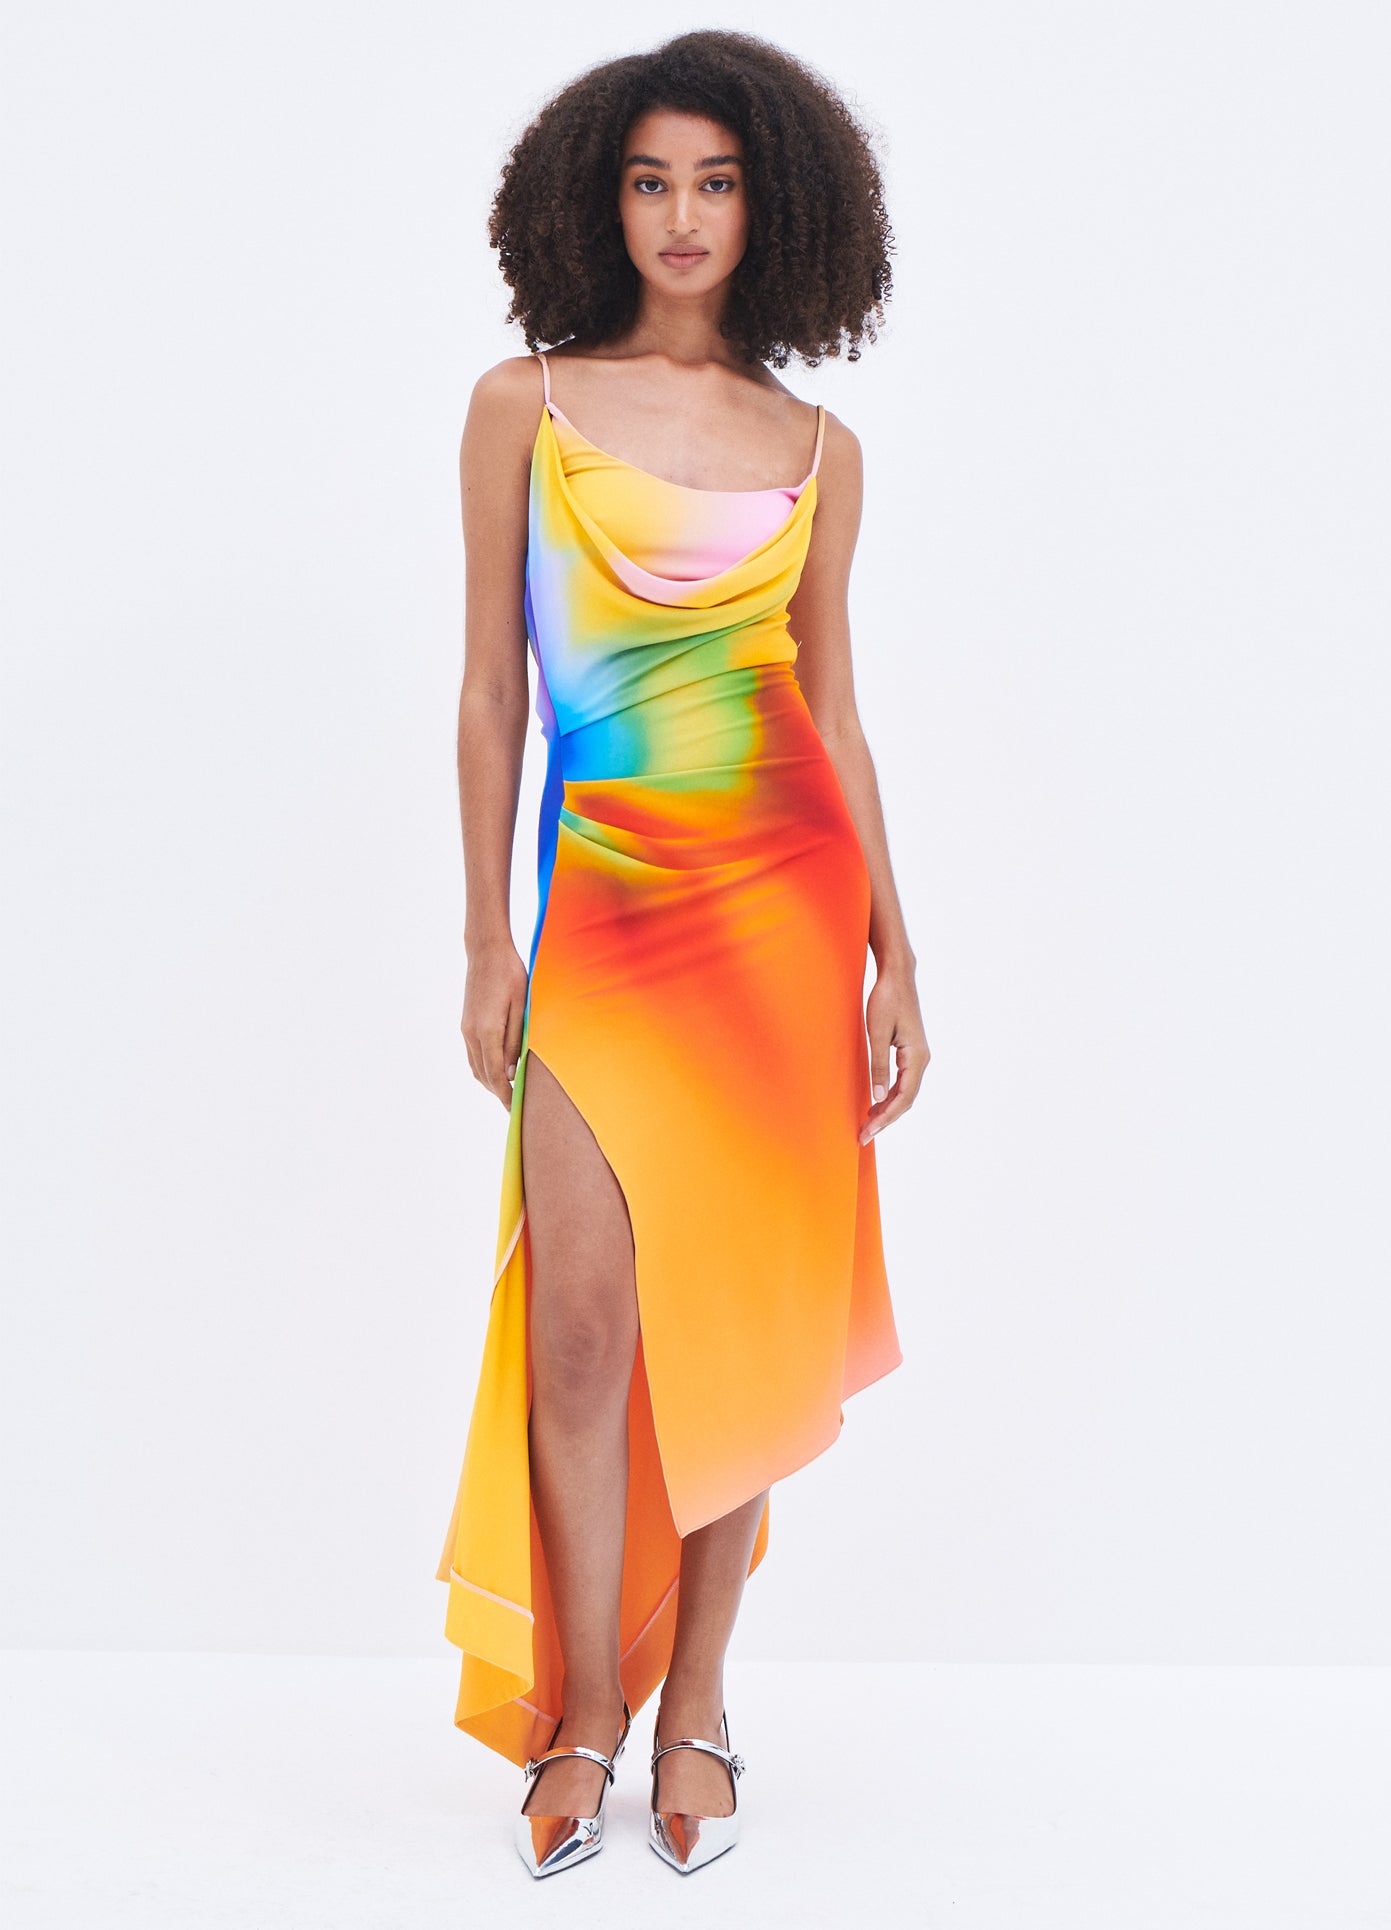 MONSE Rainbow Orchid Slip Dress in Multi Colors on model full front view